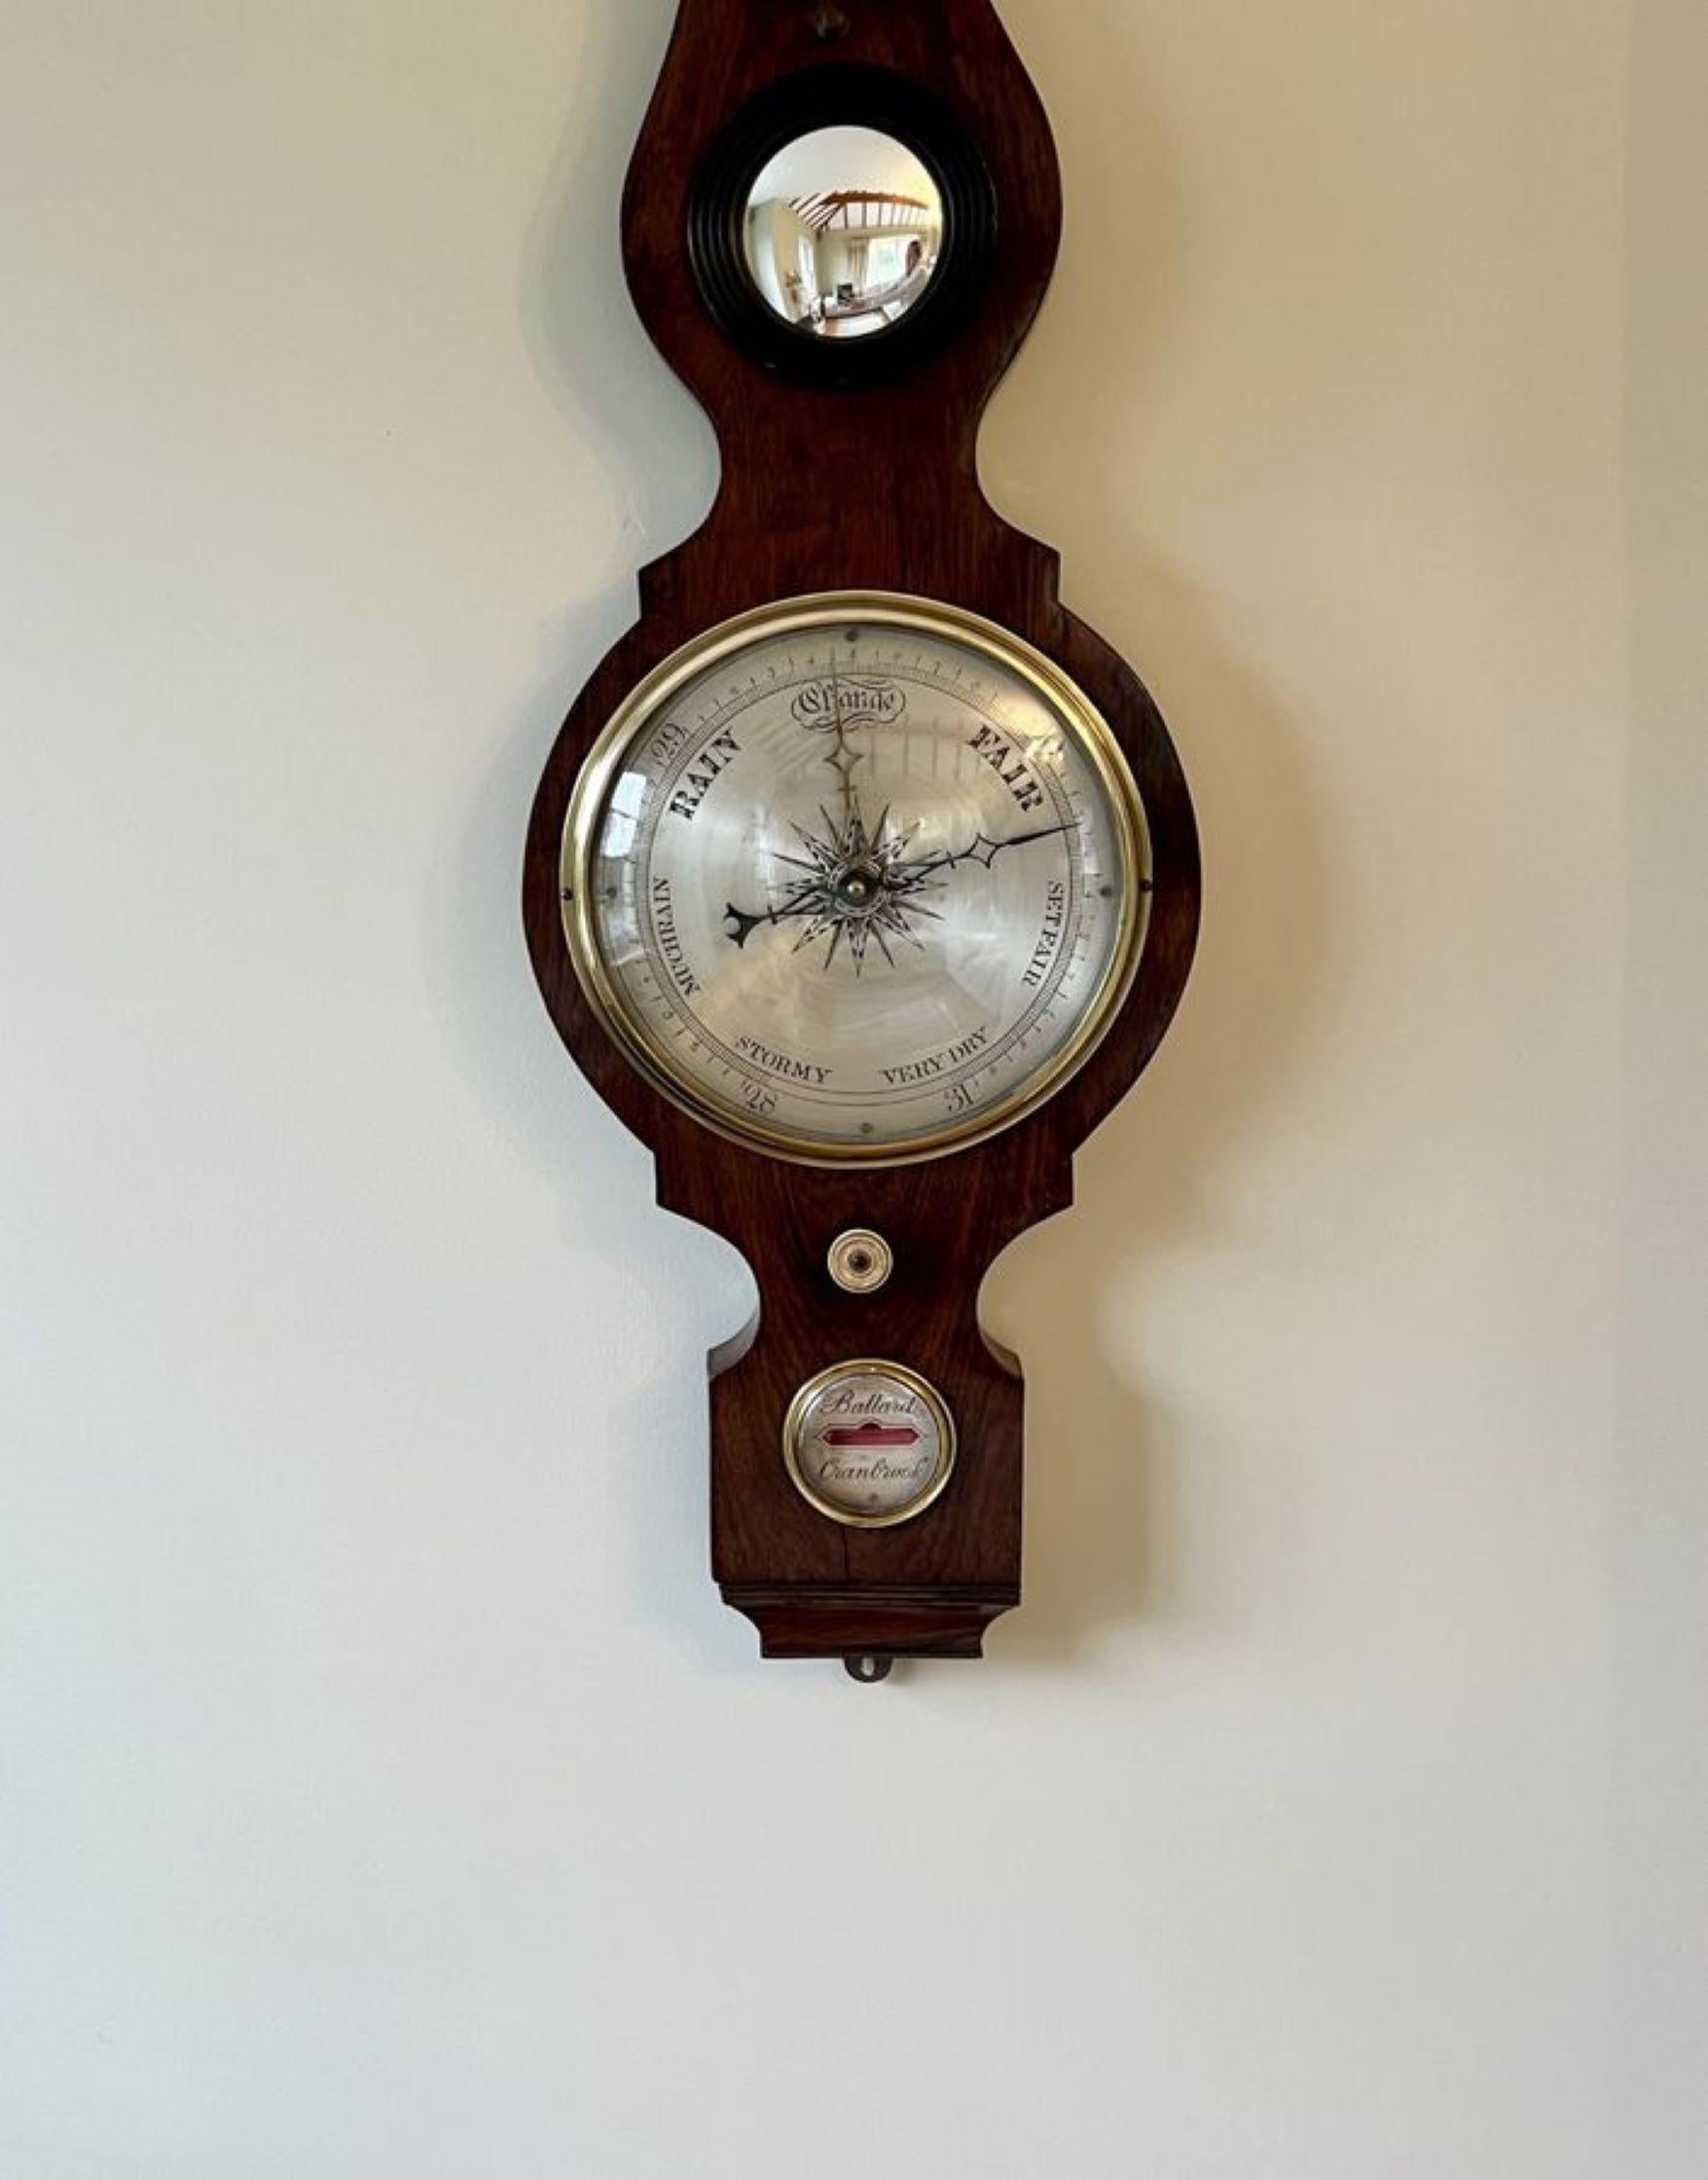 Quality antique Victorian rosewood banjo barometer, having a shaped wheel barometer by Ballard of Cranbrook, thermometer hygrometer spirit level and a circular silvered engraved dial with a brass bezel. 

D. 1880